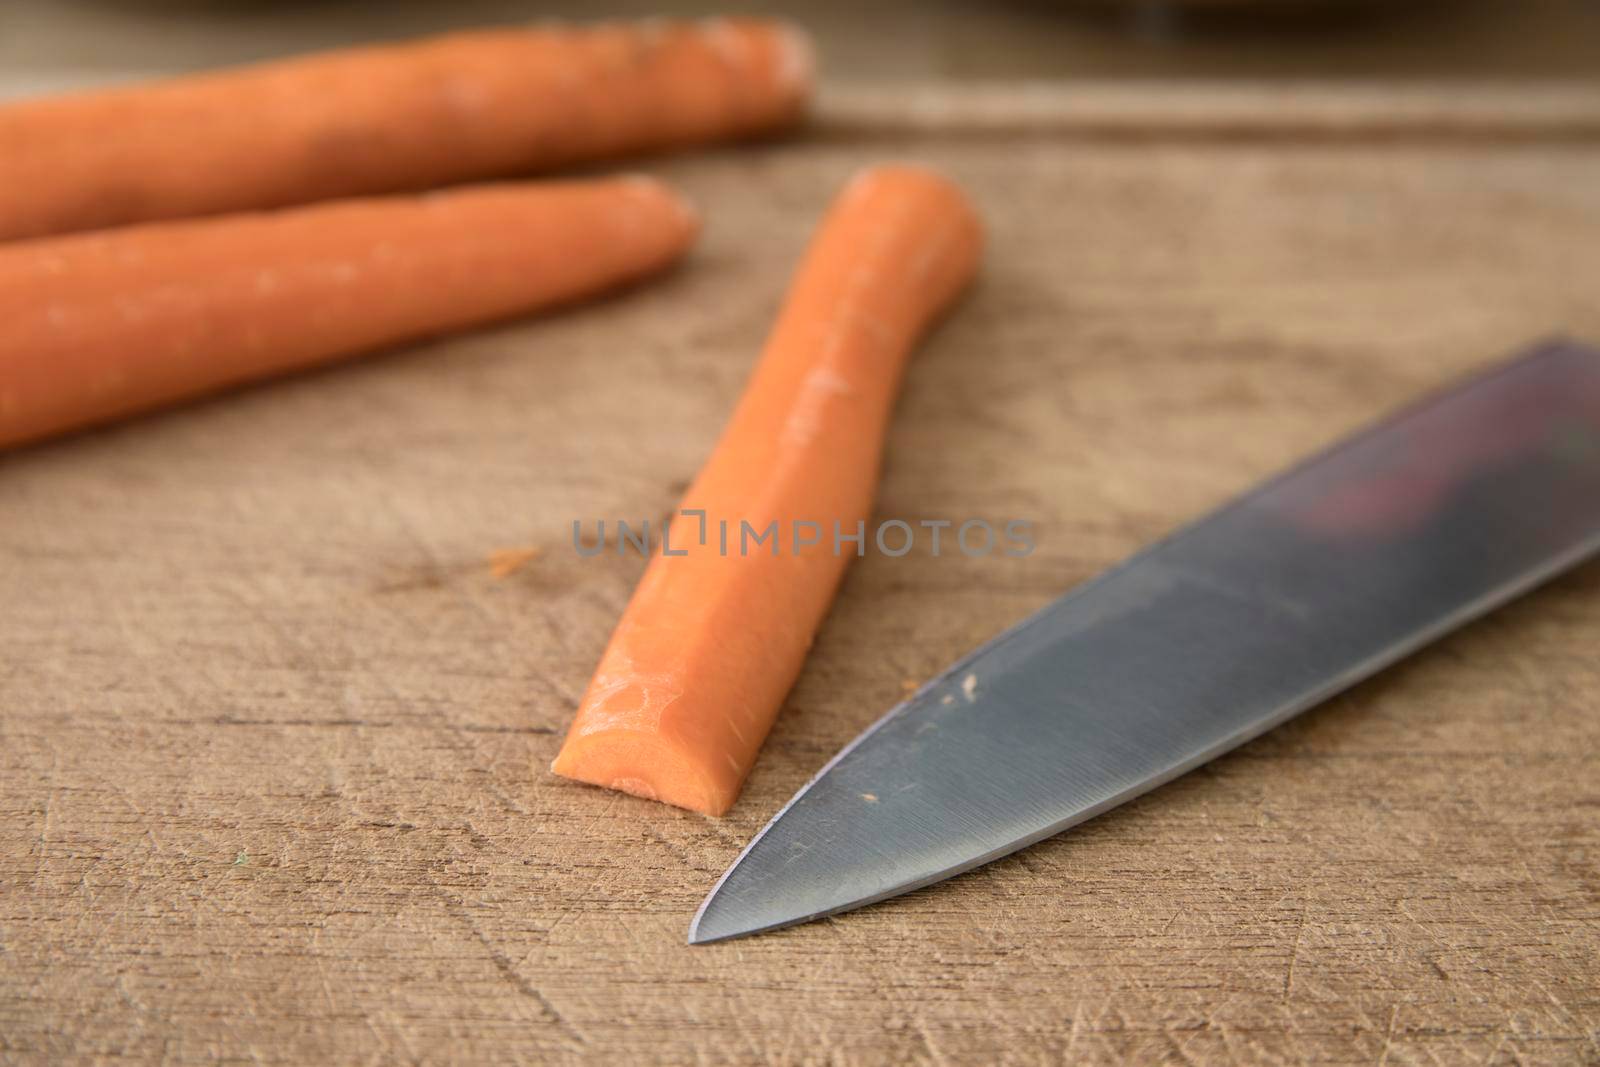 Knife skills cutting a carrot: carrot and chef's knife on cutting board.